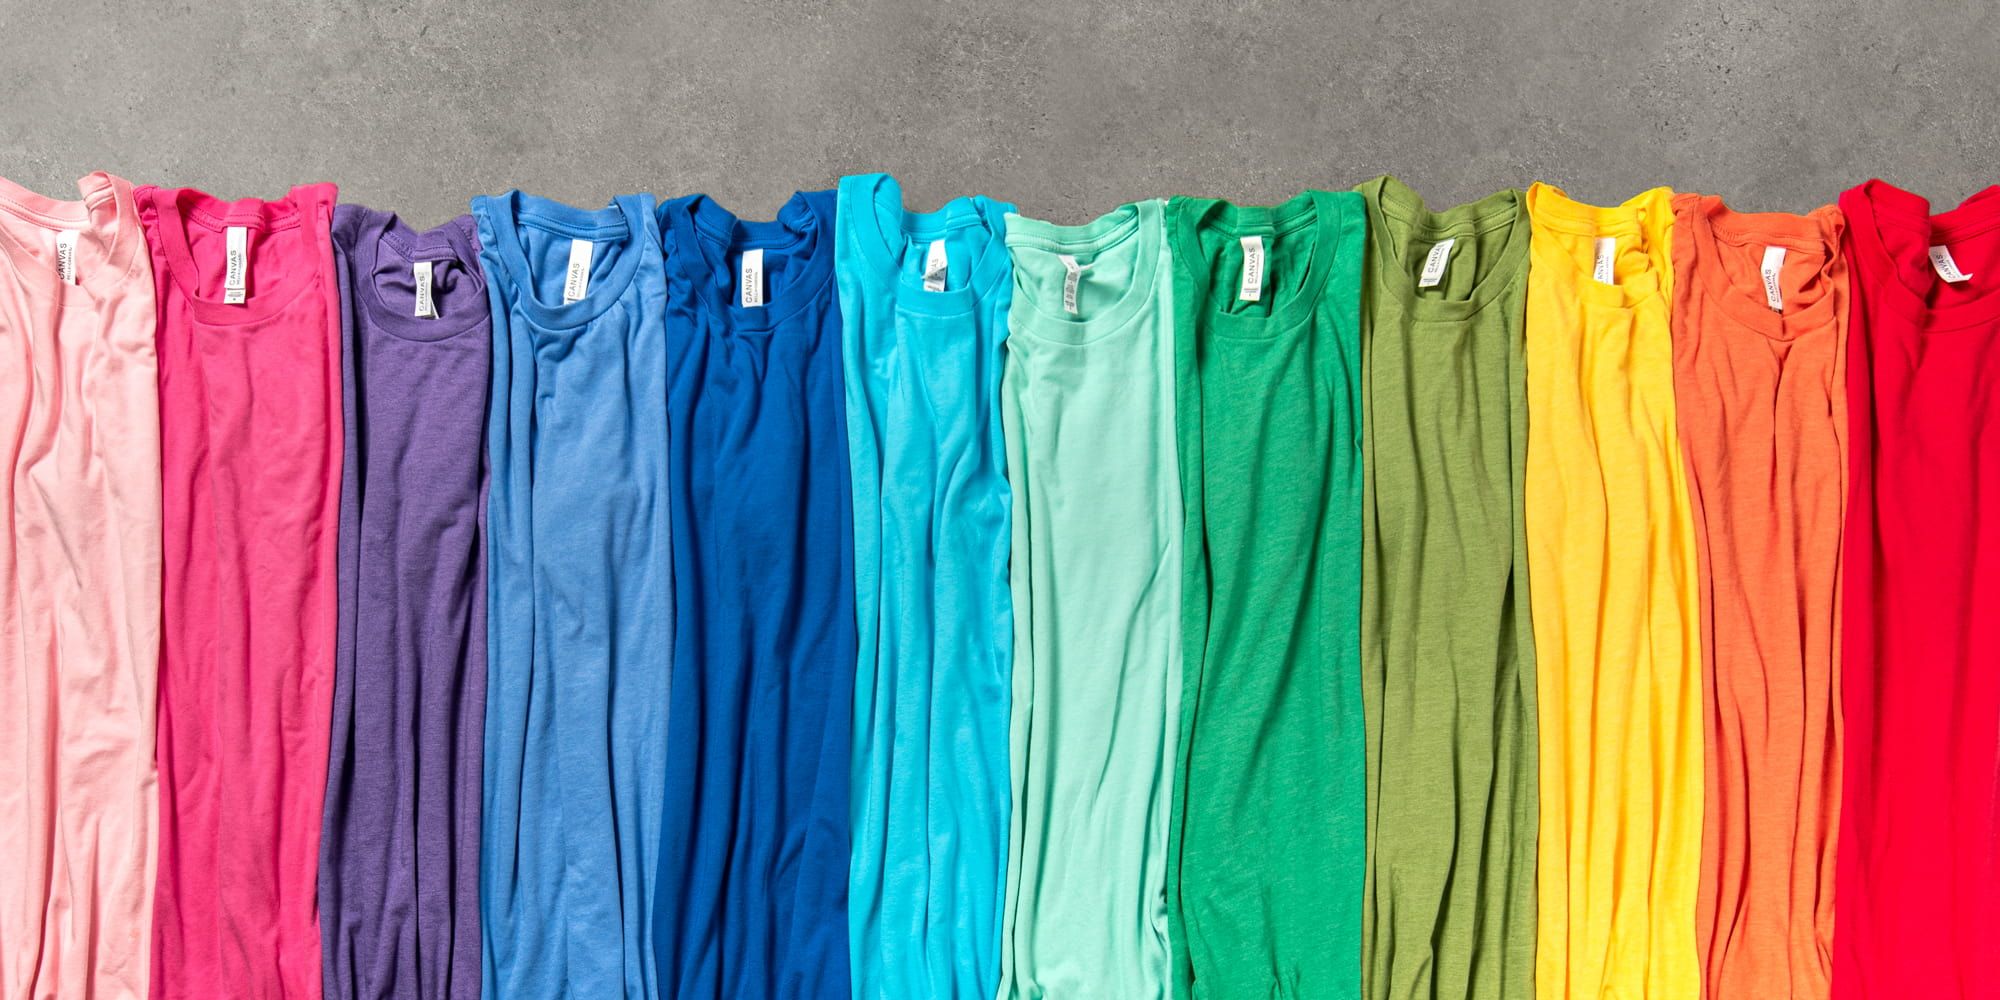 Top down image of colorful shirts side-by-side that show all the colors of the rainbow